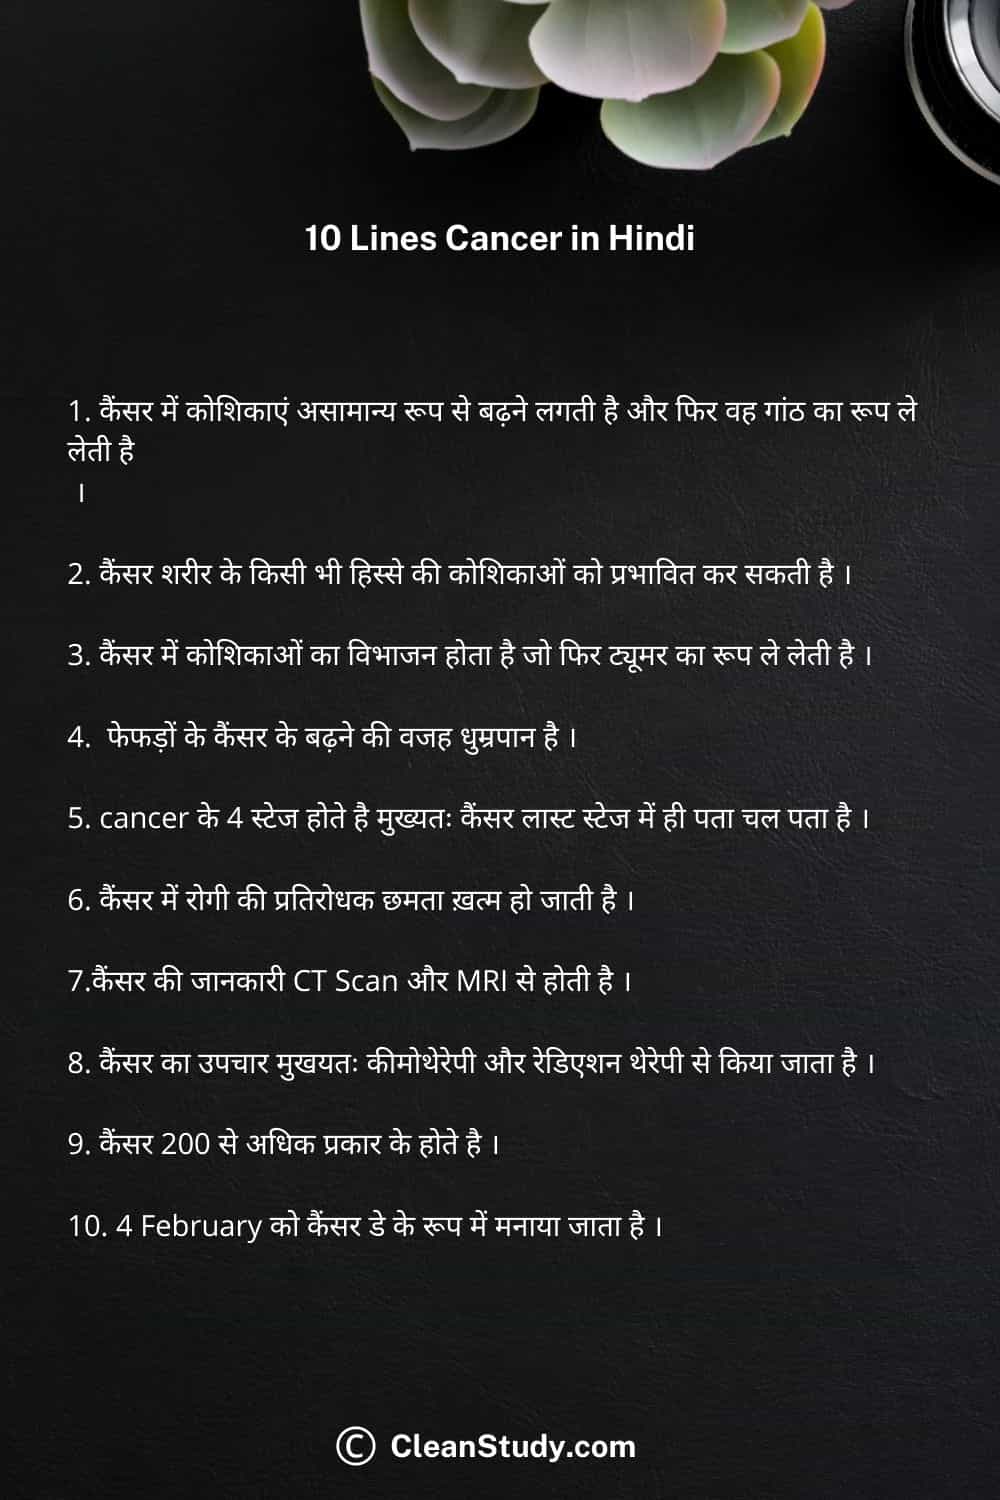 10 Lines on Cancer in Hindi